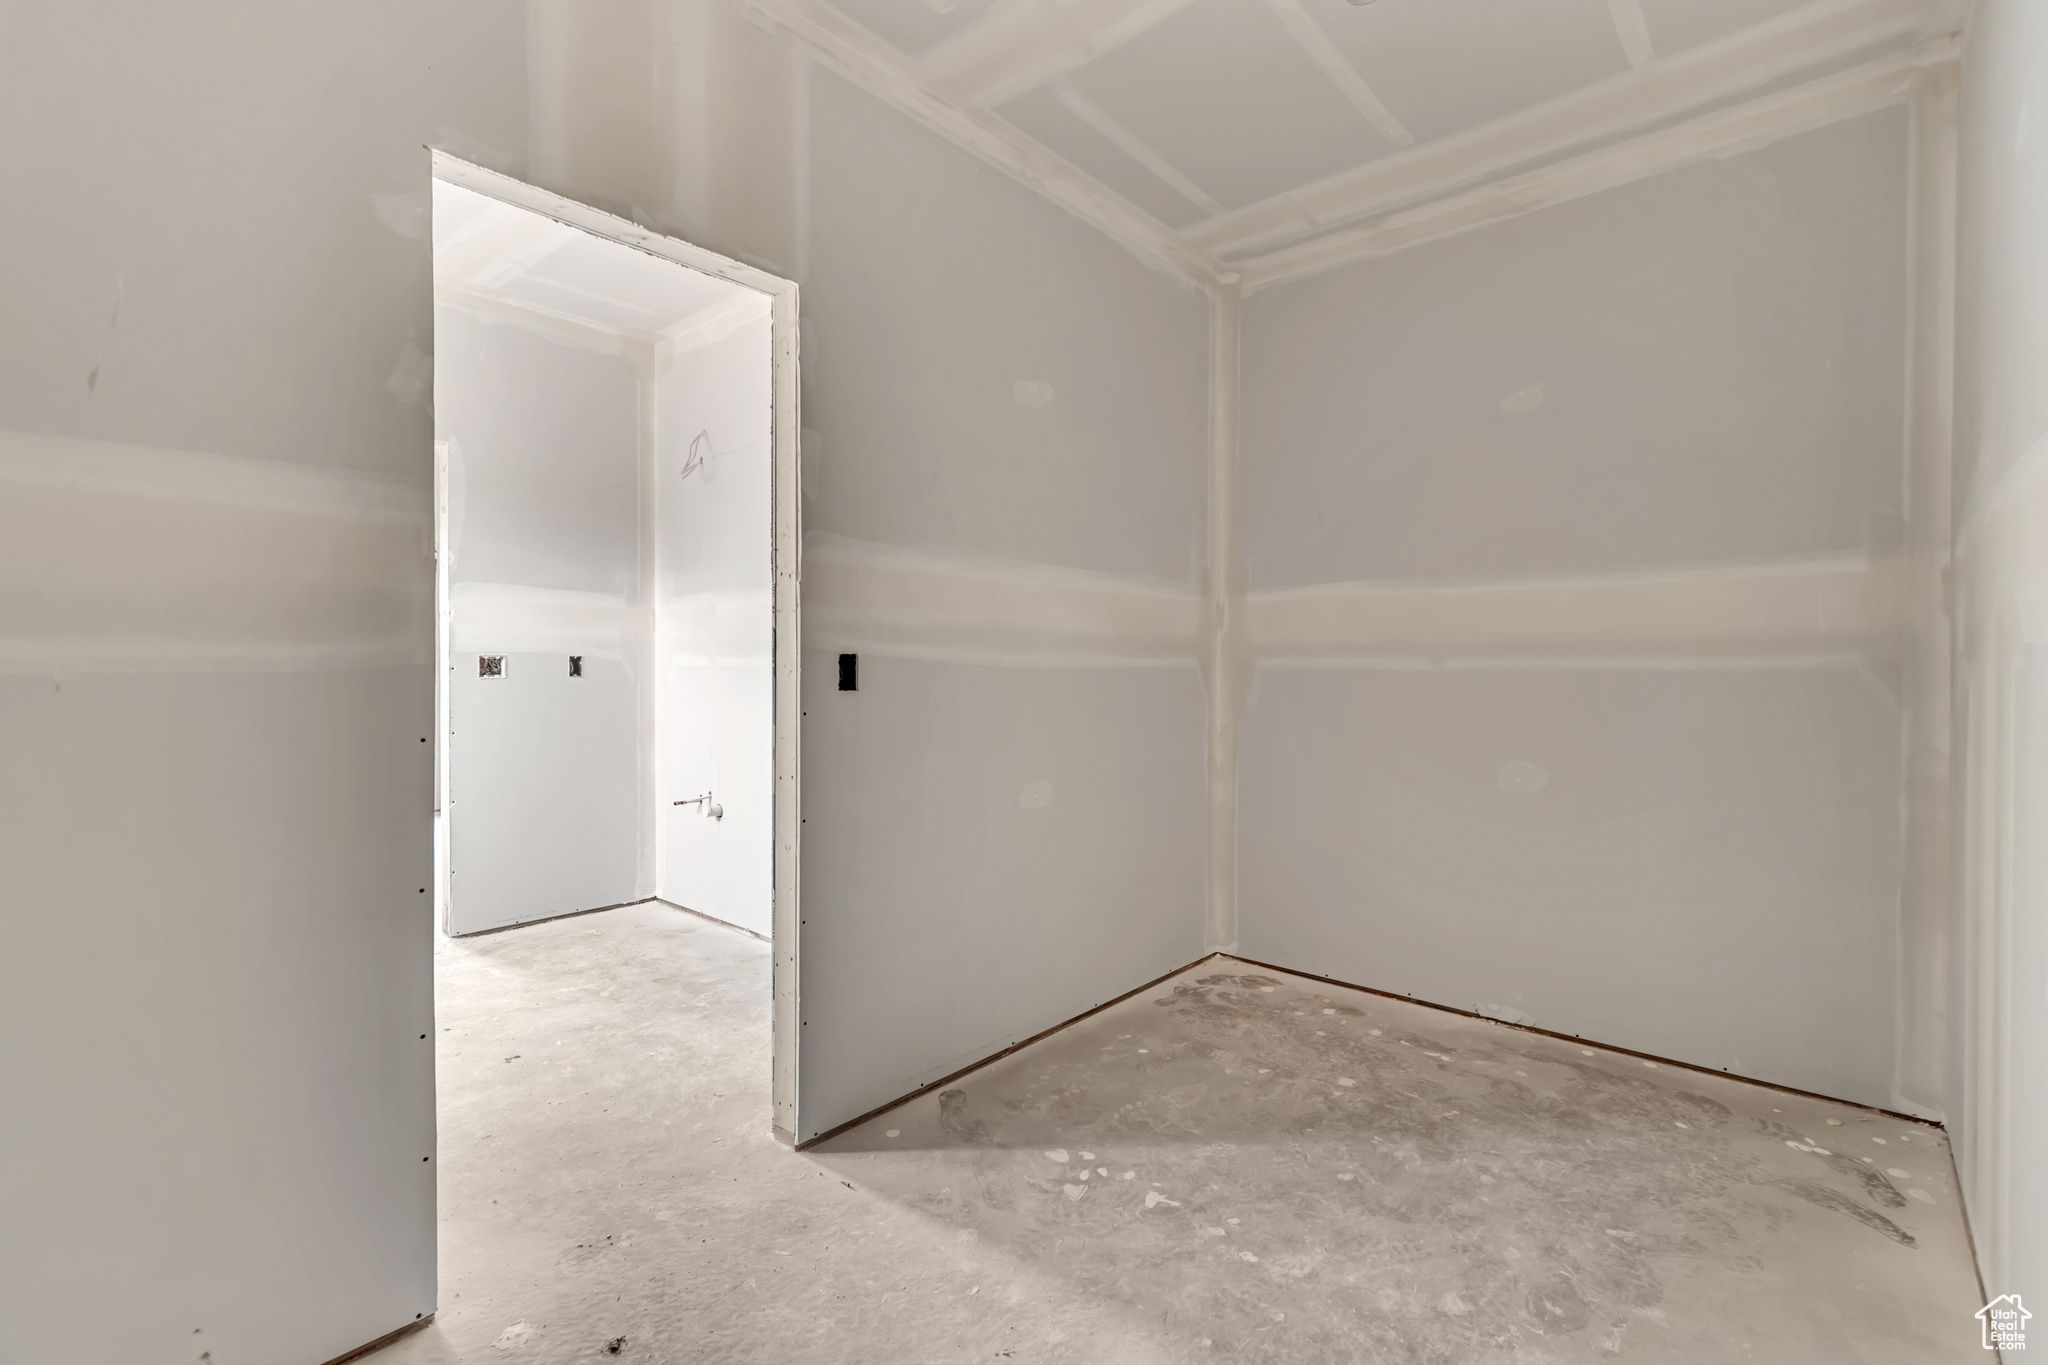 Unfurnished room with concrete floors